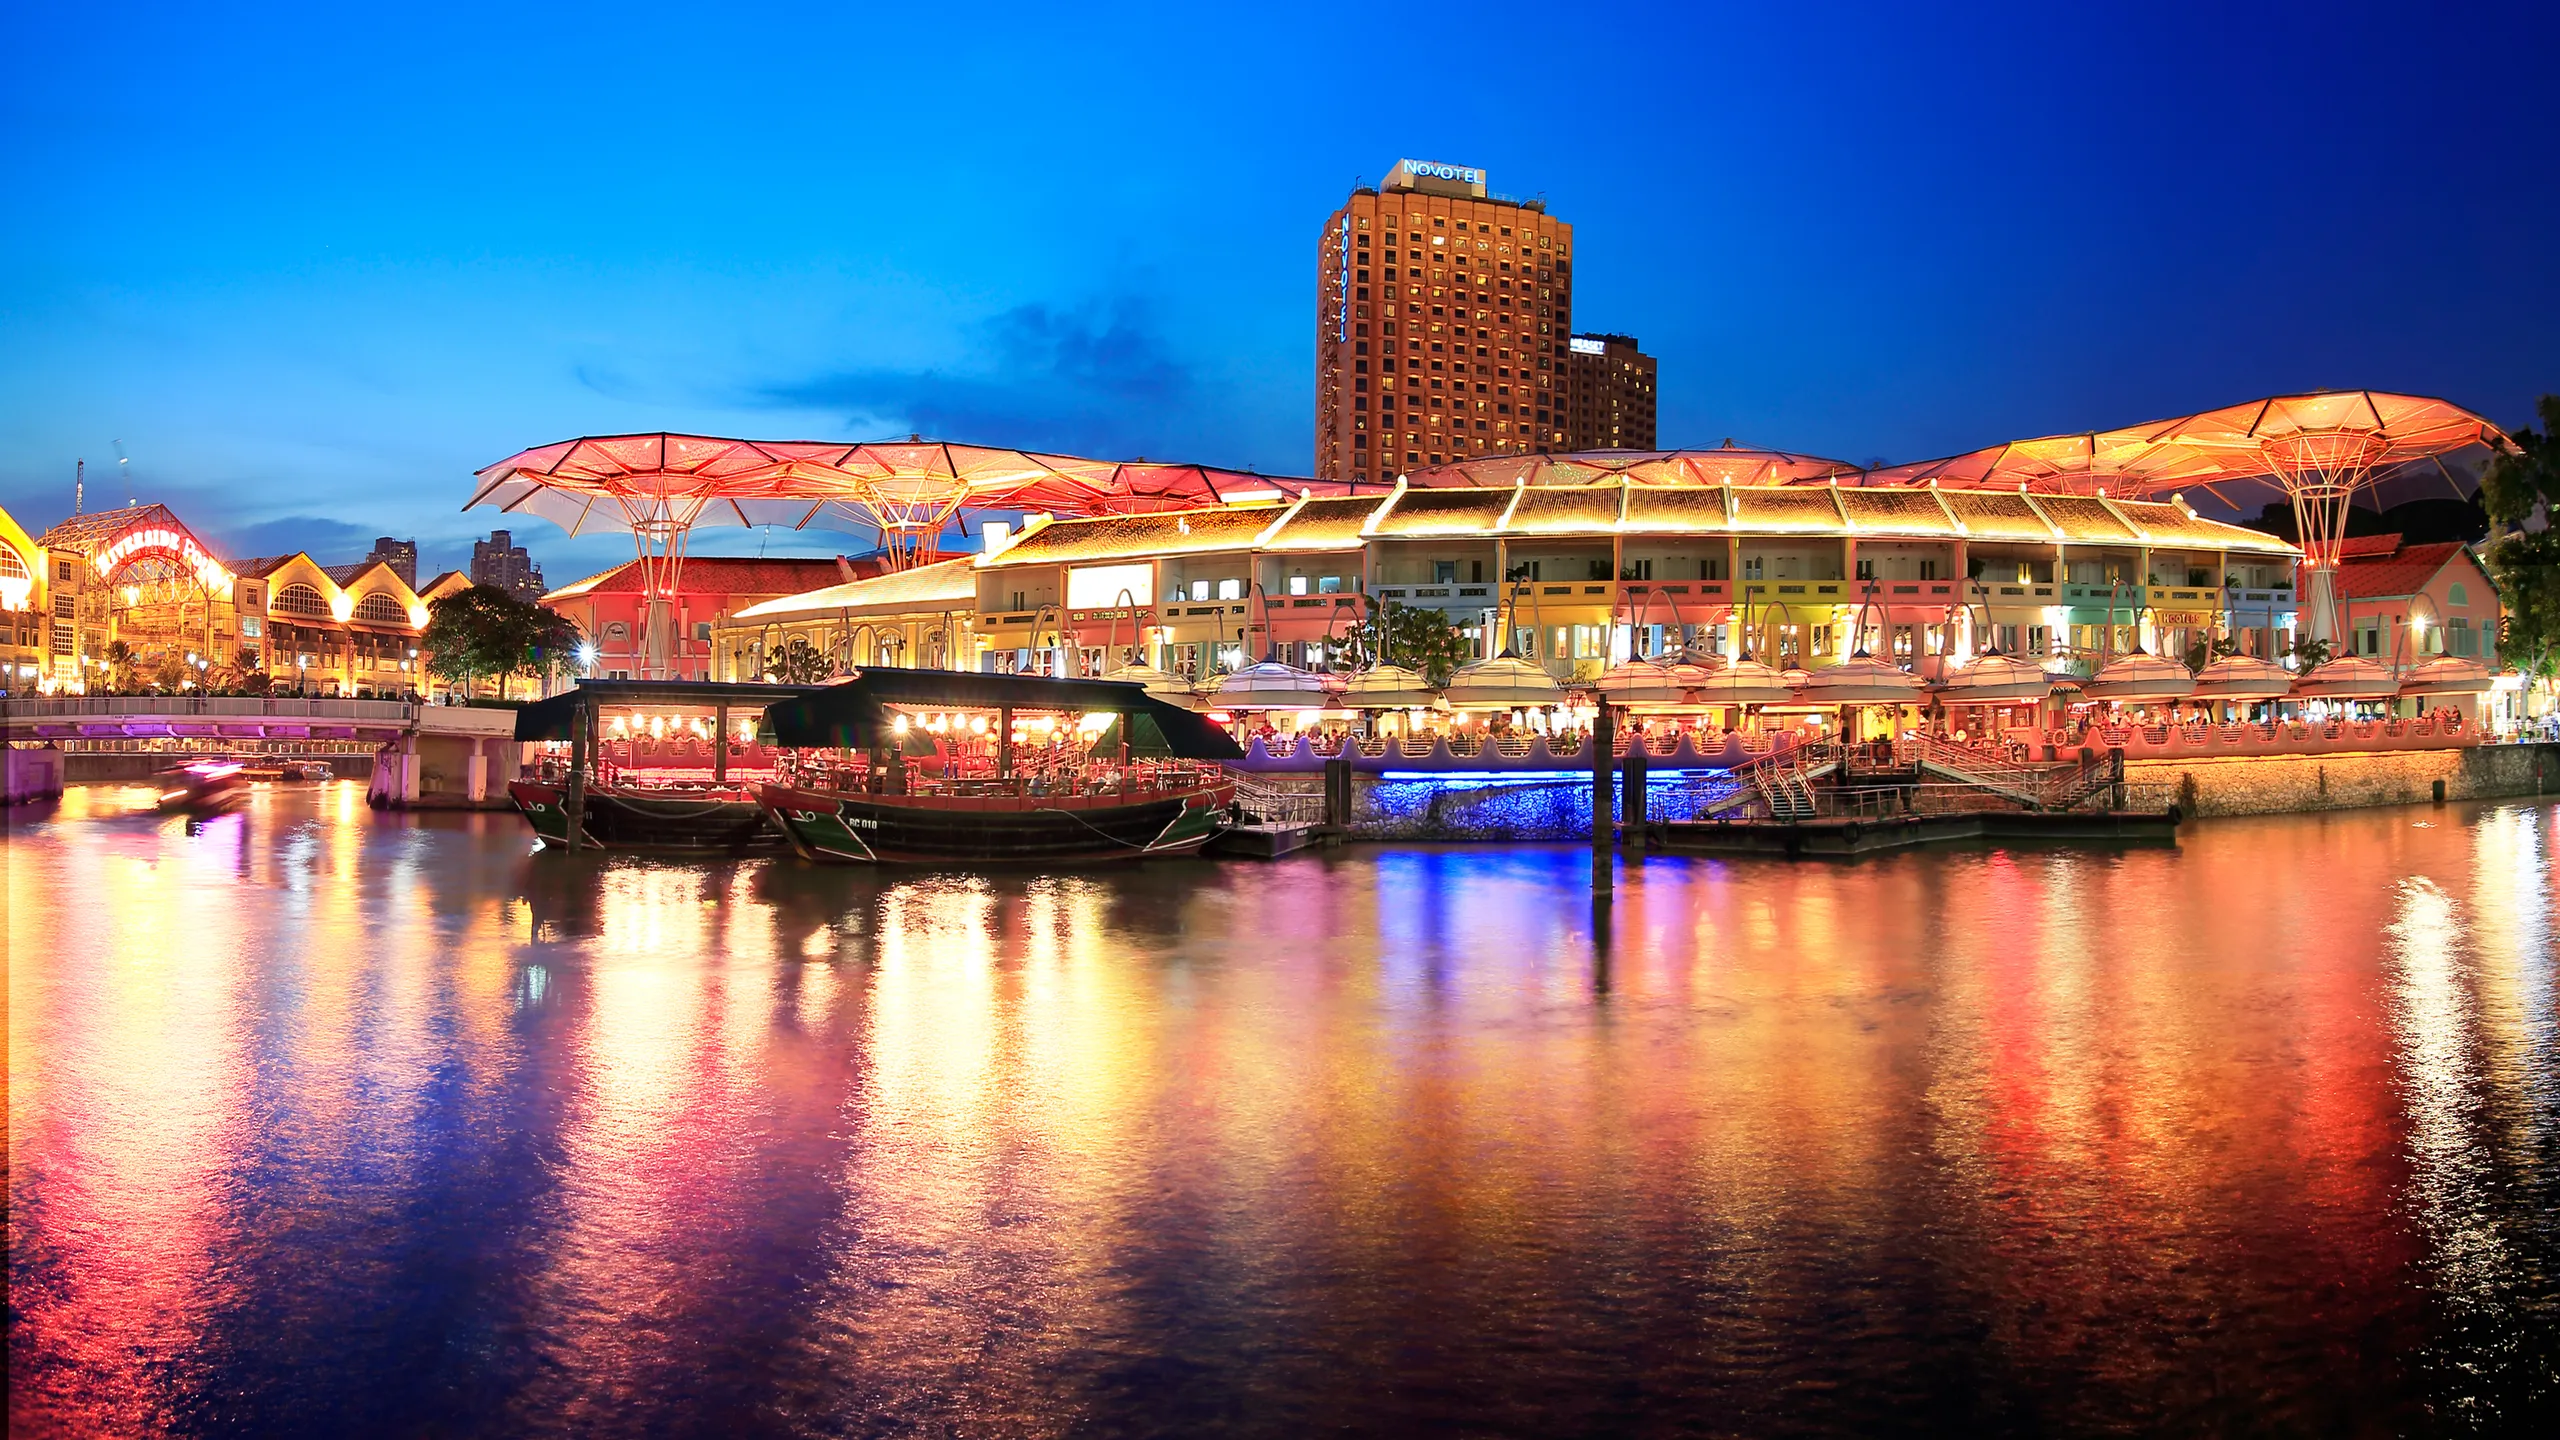 Clarke Quay in Singapore, central_asia | Handbags,Shoes,Accessories,Cosmetics,Sportswear - Country Helper